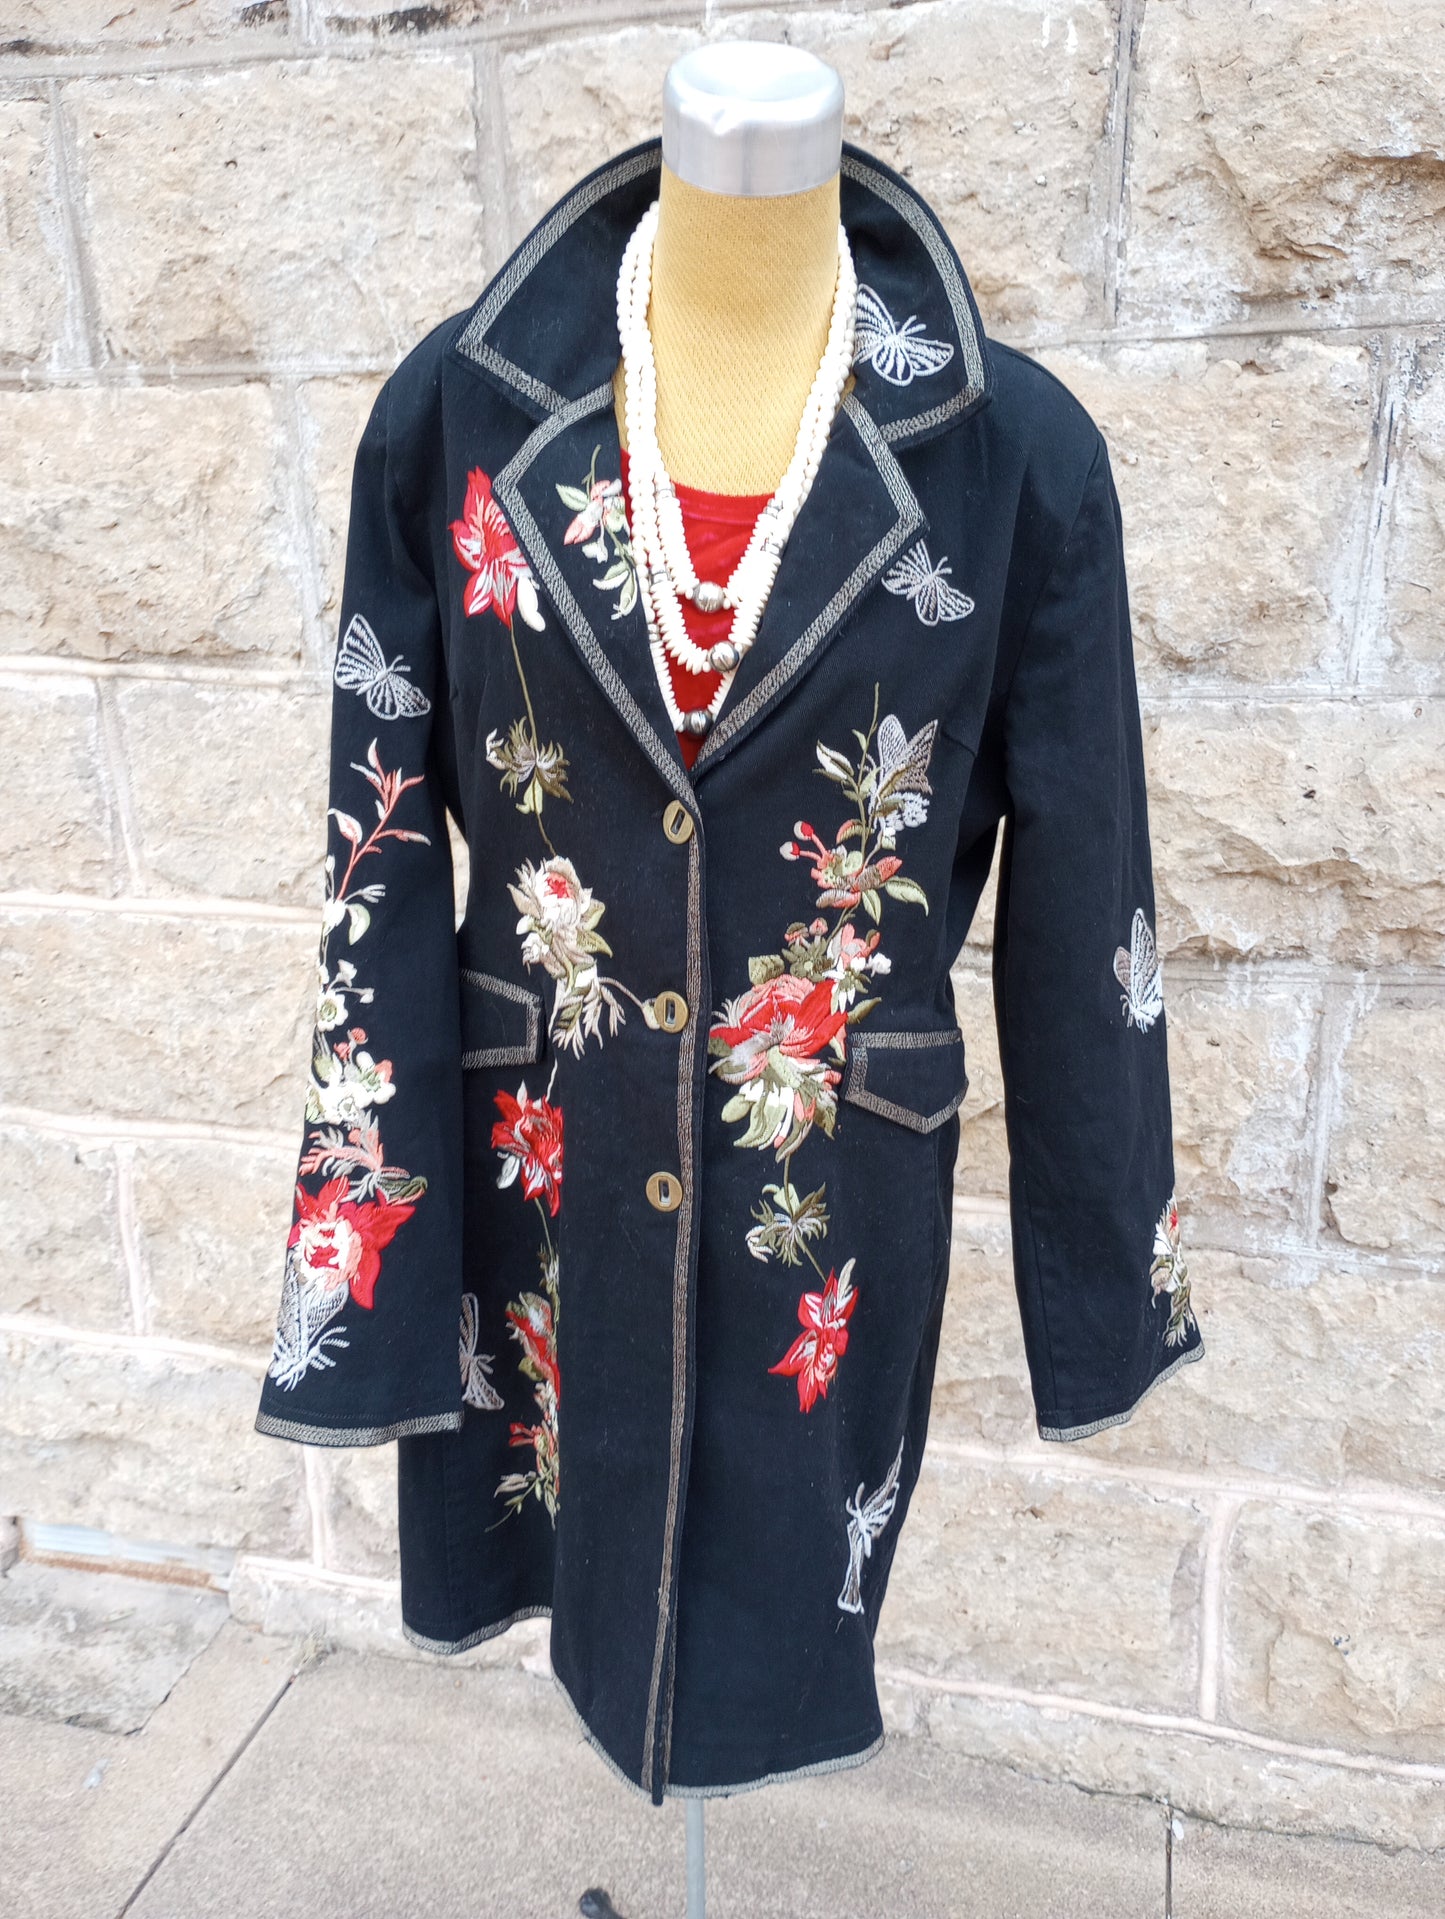 NWT heavily embroidered jacket